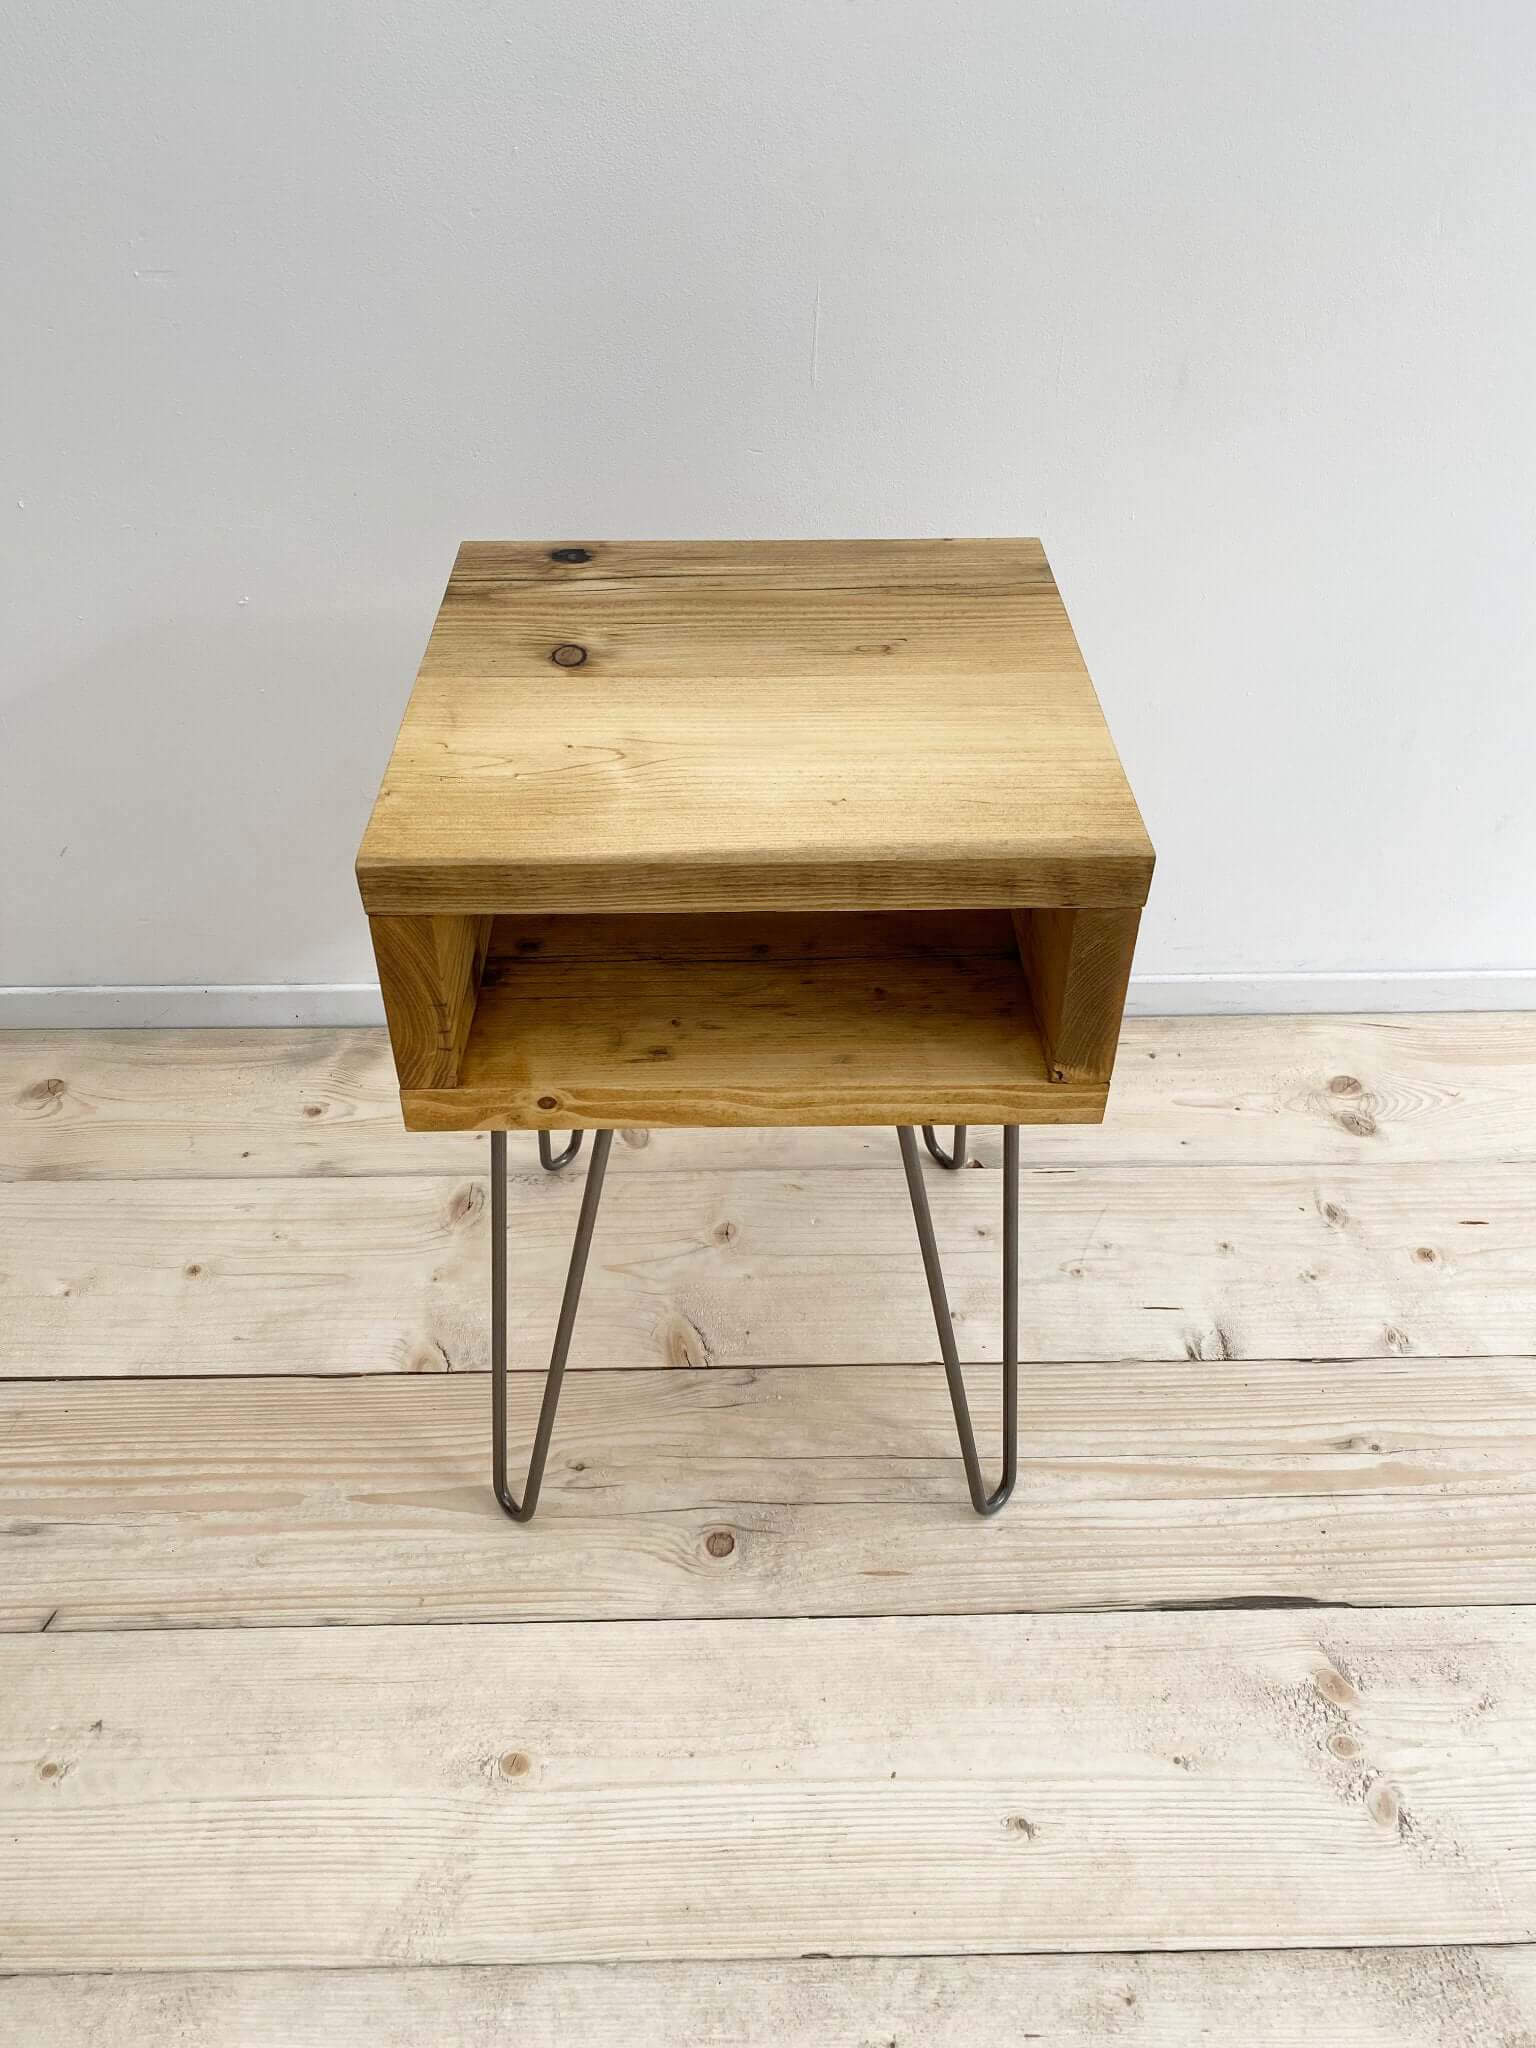 Reclaimed wood side table with hairpin legs.